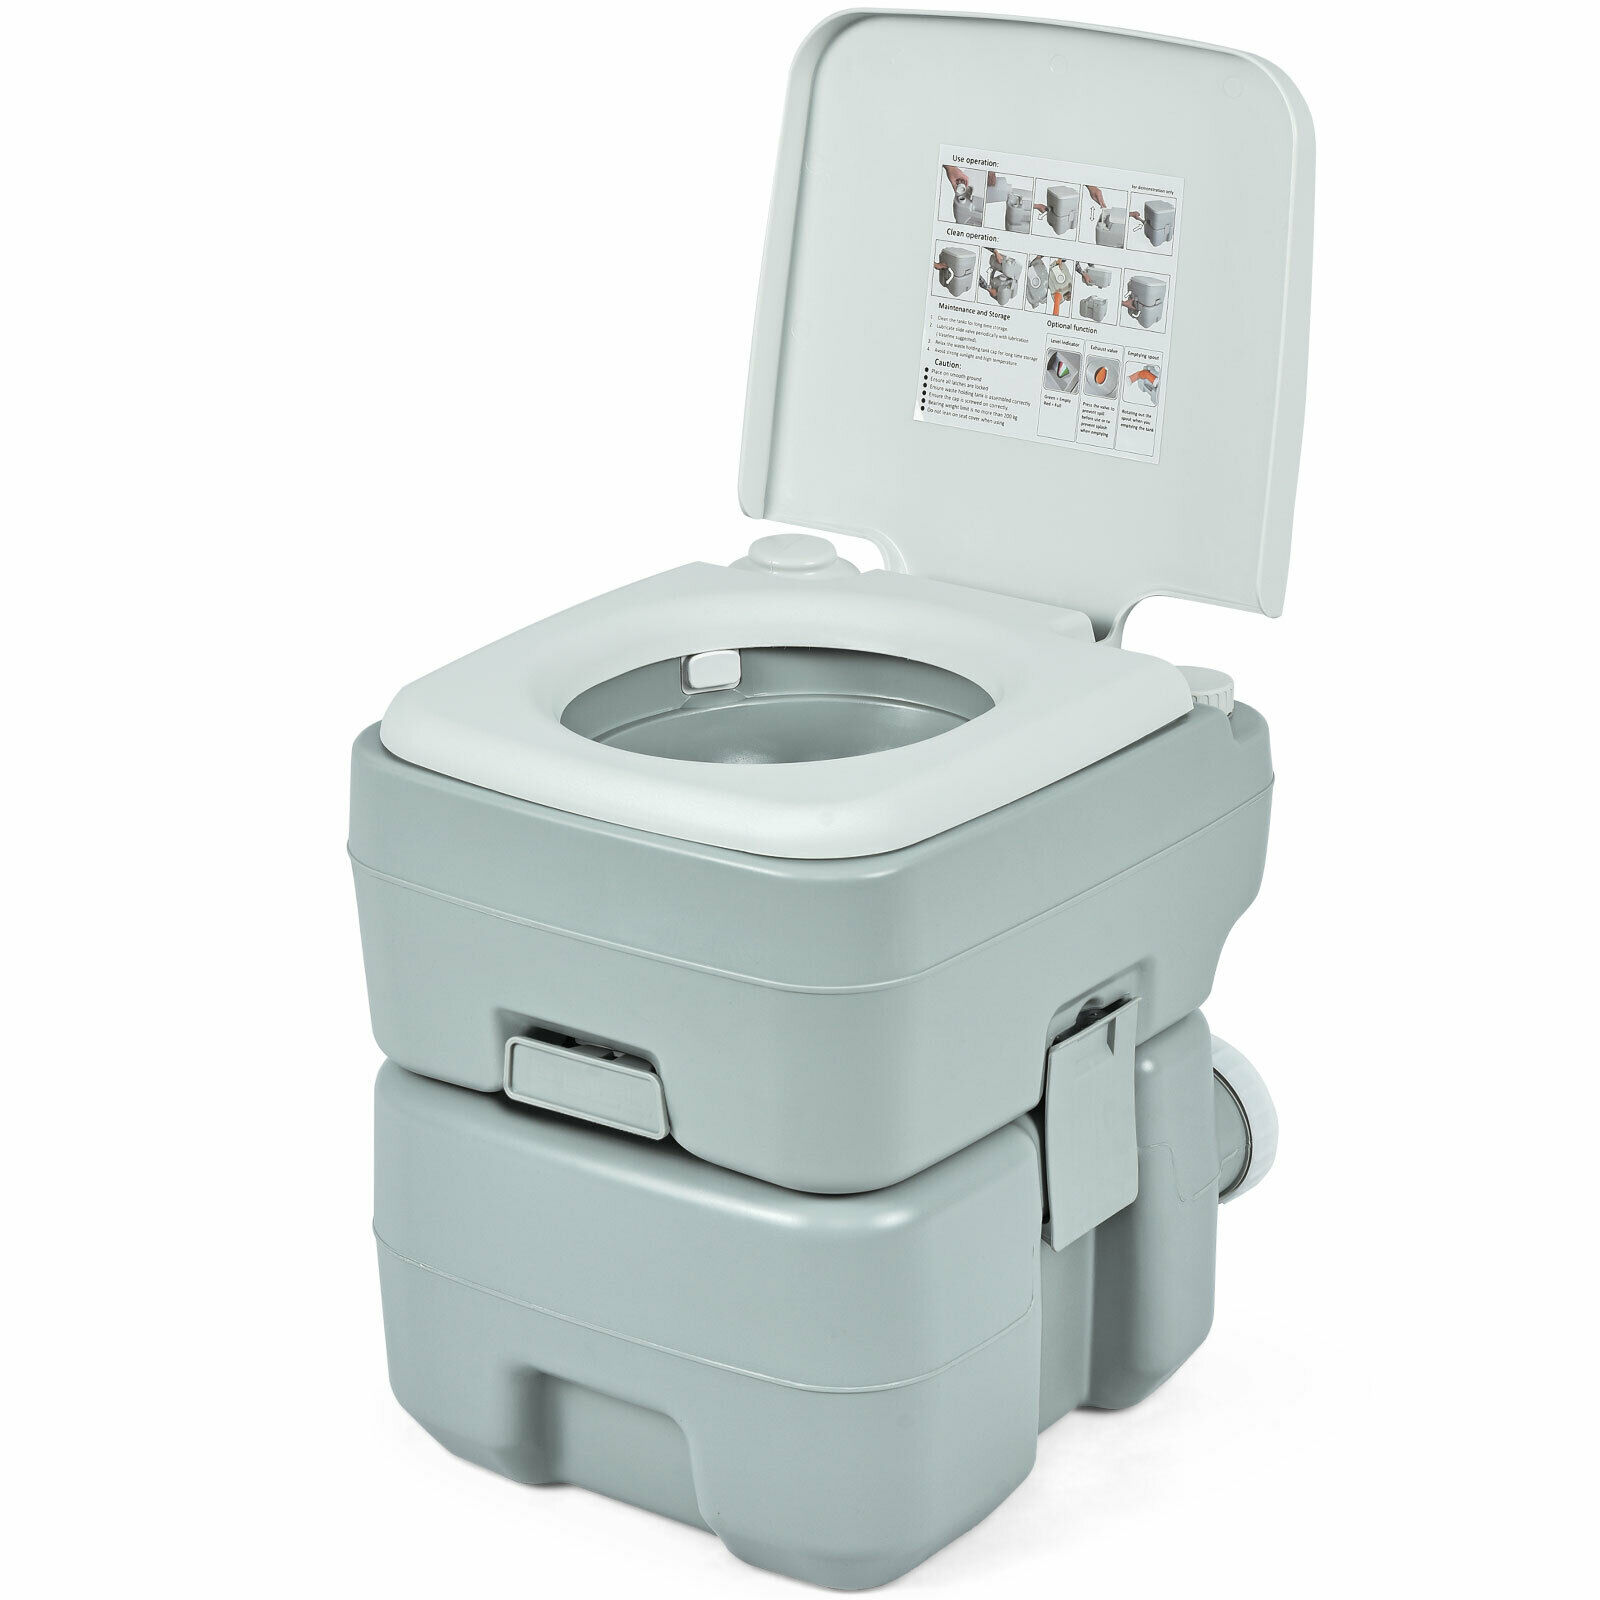 Costway 5.3 Gallon 20L Outdoor Portable Toilet w/ Level Indicator for RV Travel Camping